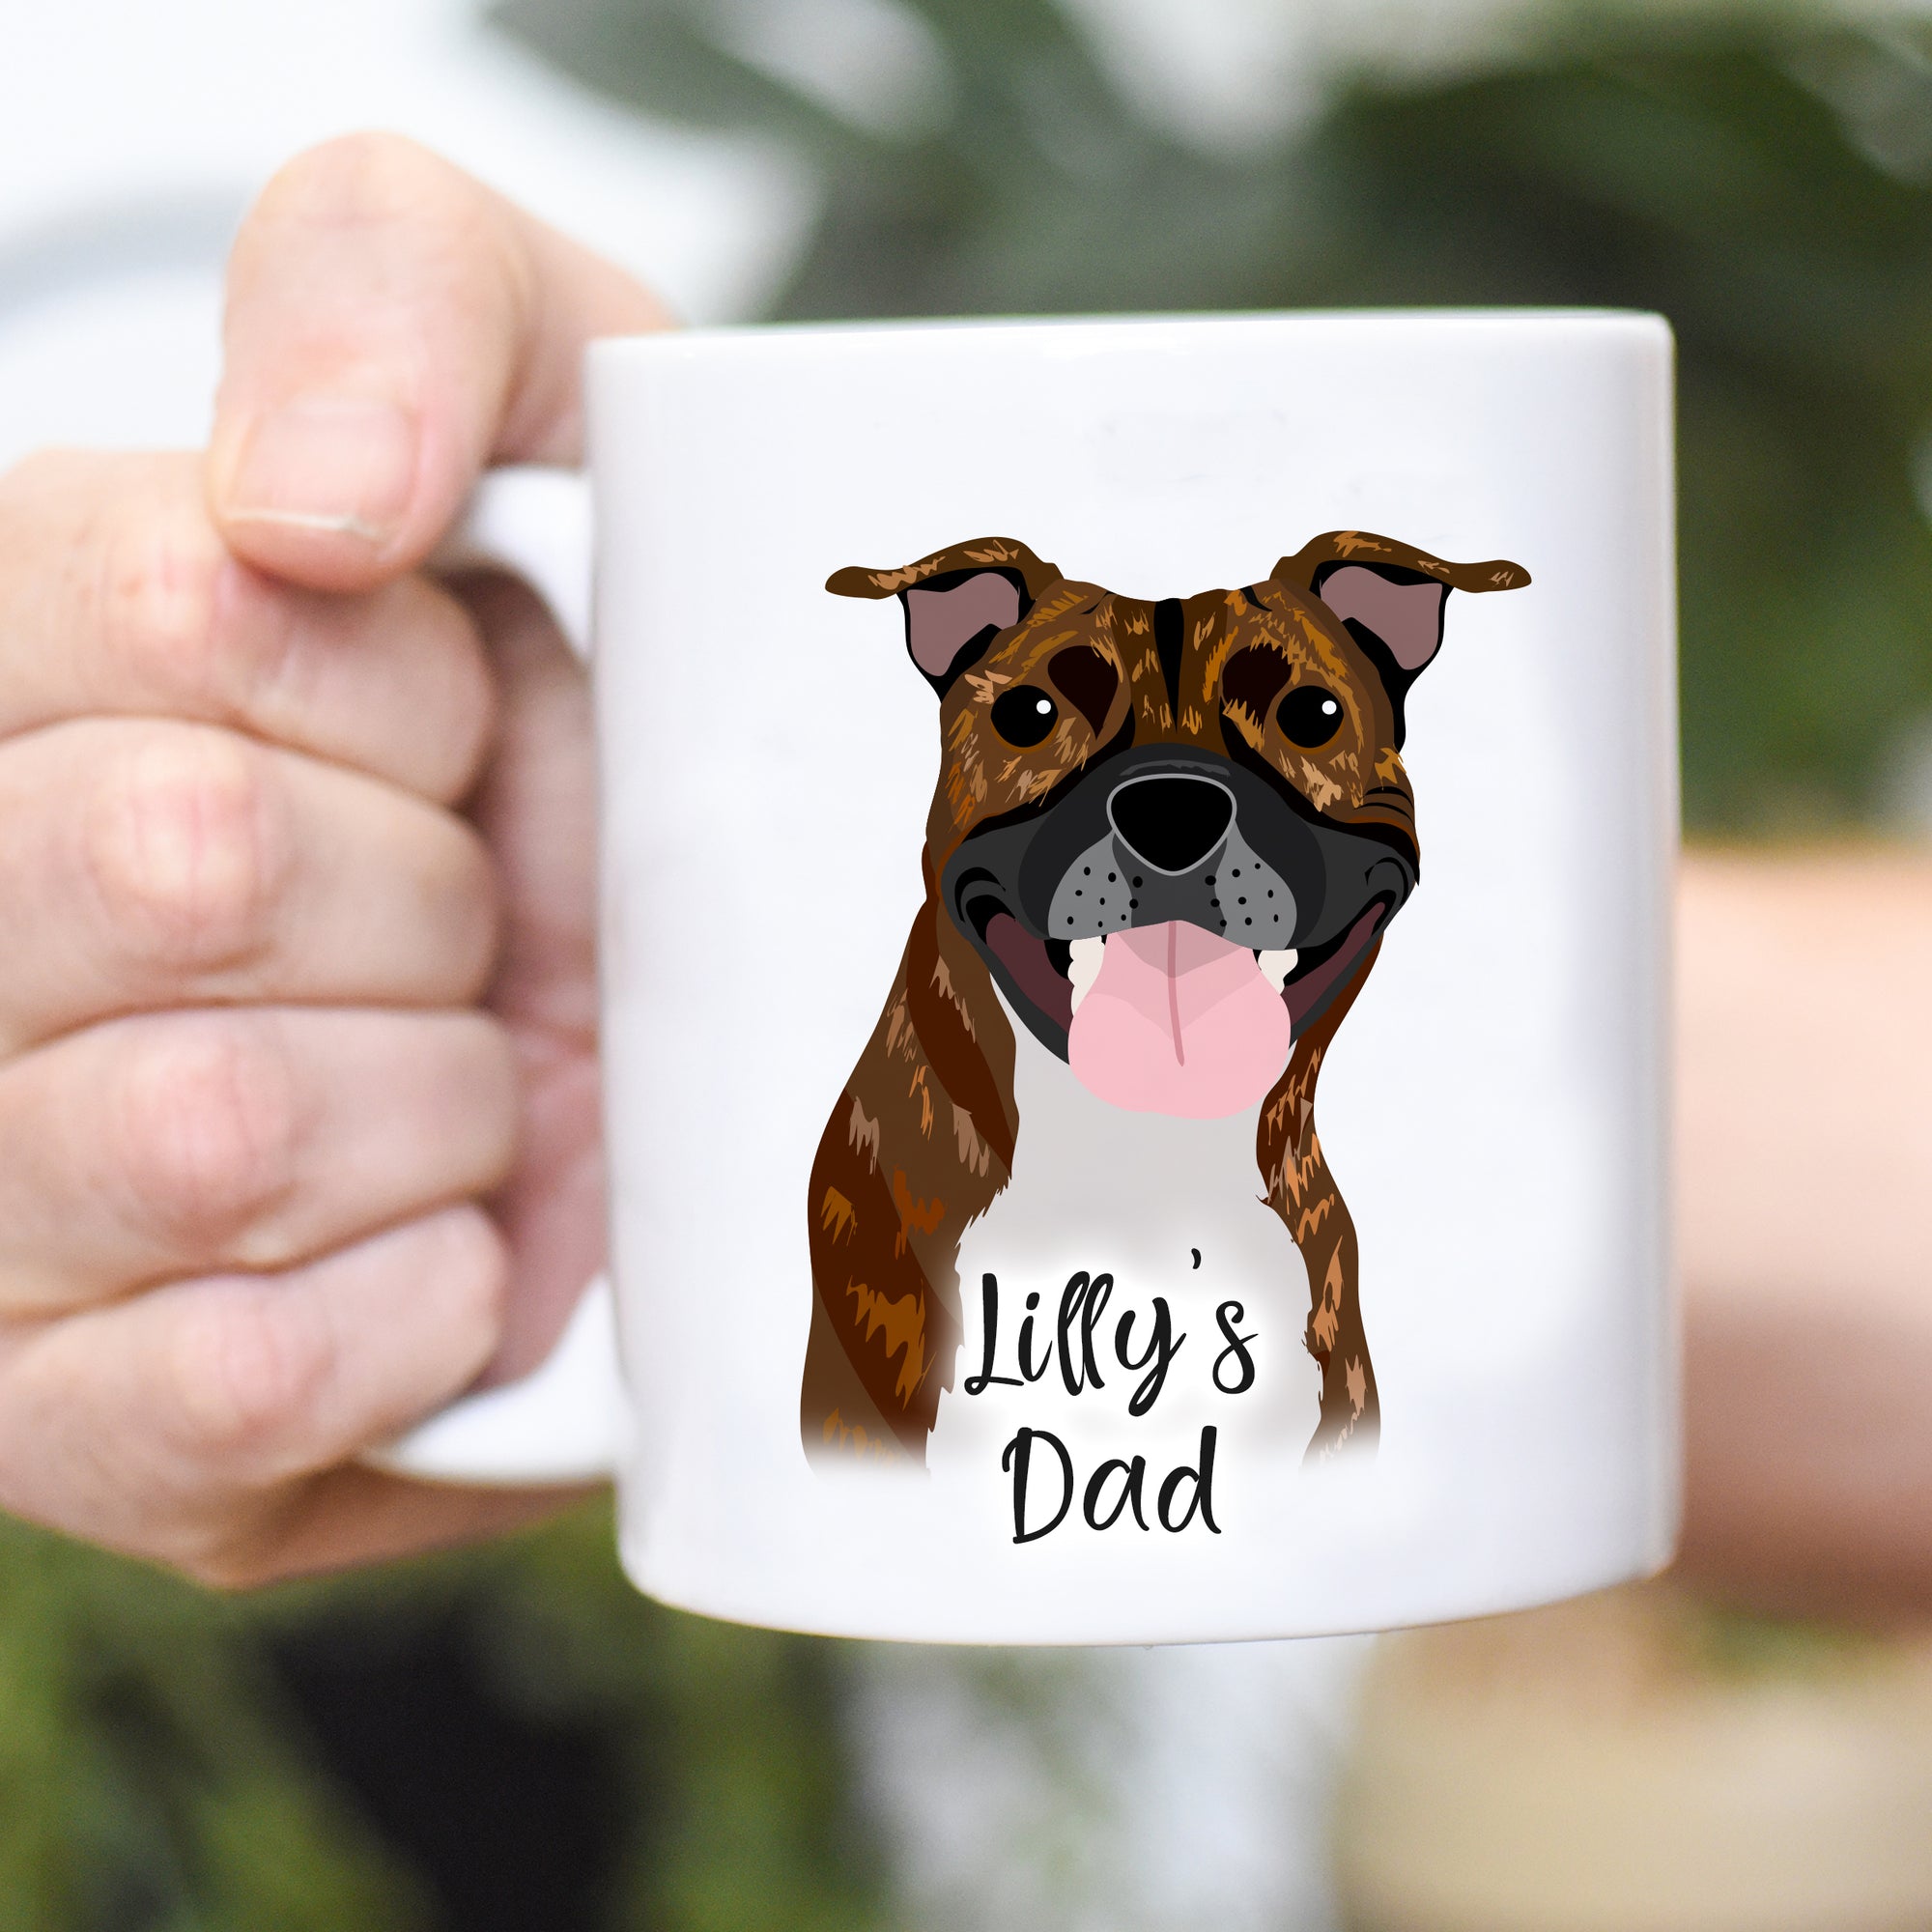 Mug for Dog Dads - Perfect for Father's Day